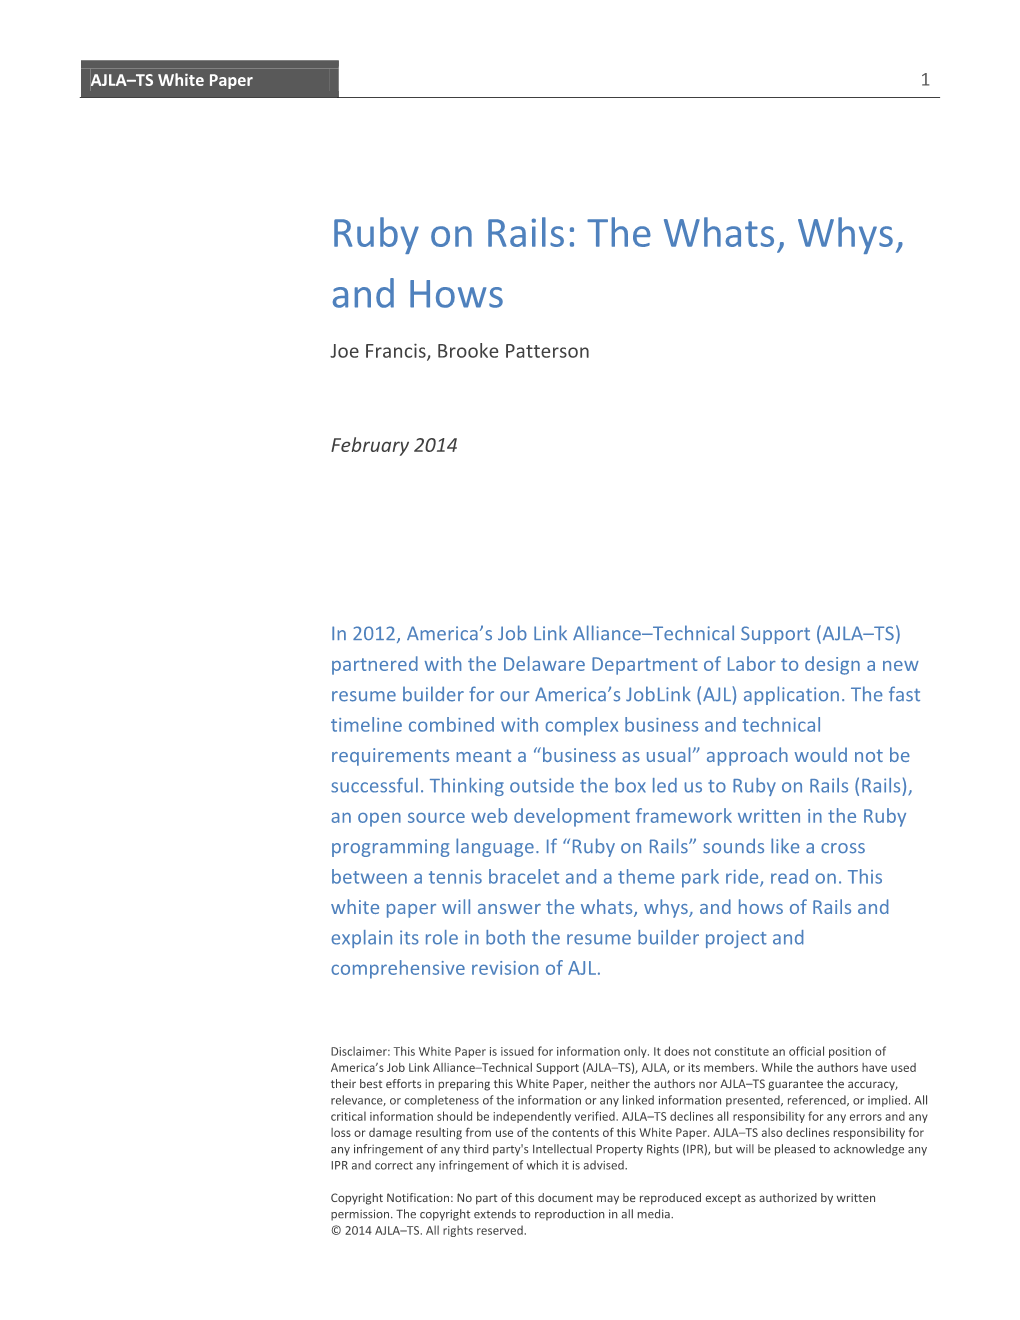 Ruby on Rails: the Whats, Whys, and Hows